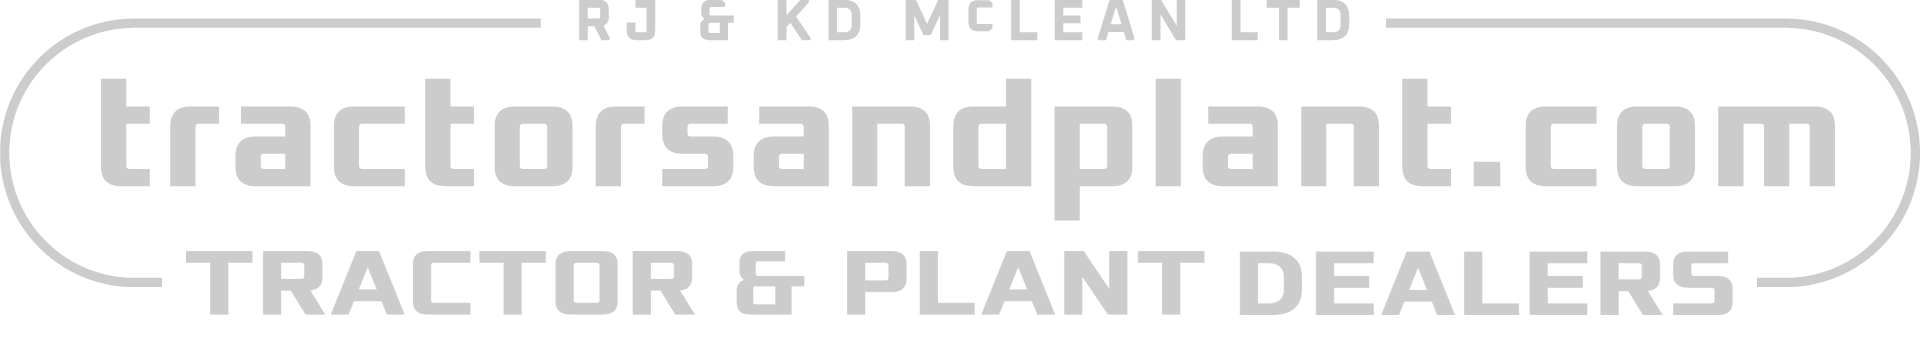 RJ and KD McLean Ltd - Tractors and Plant